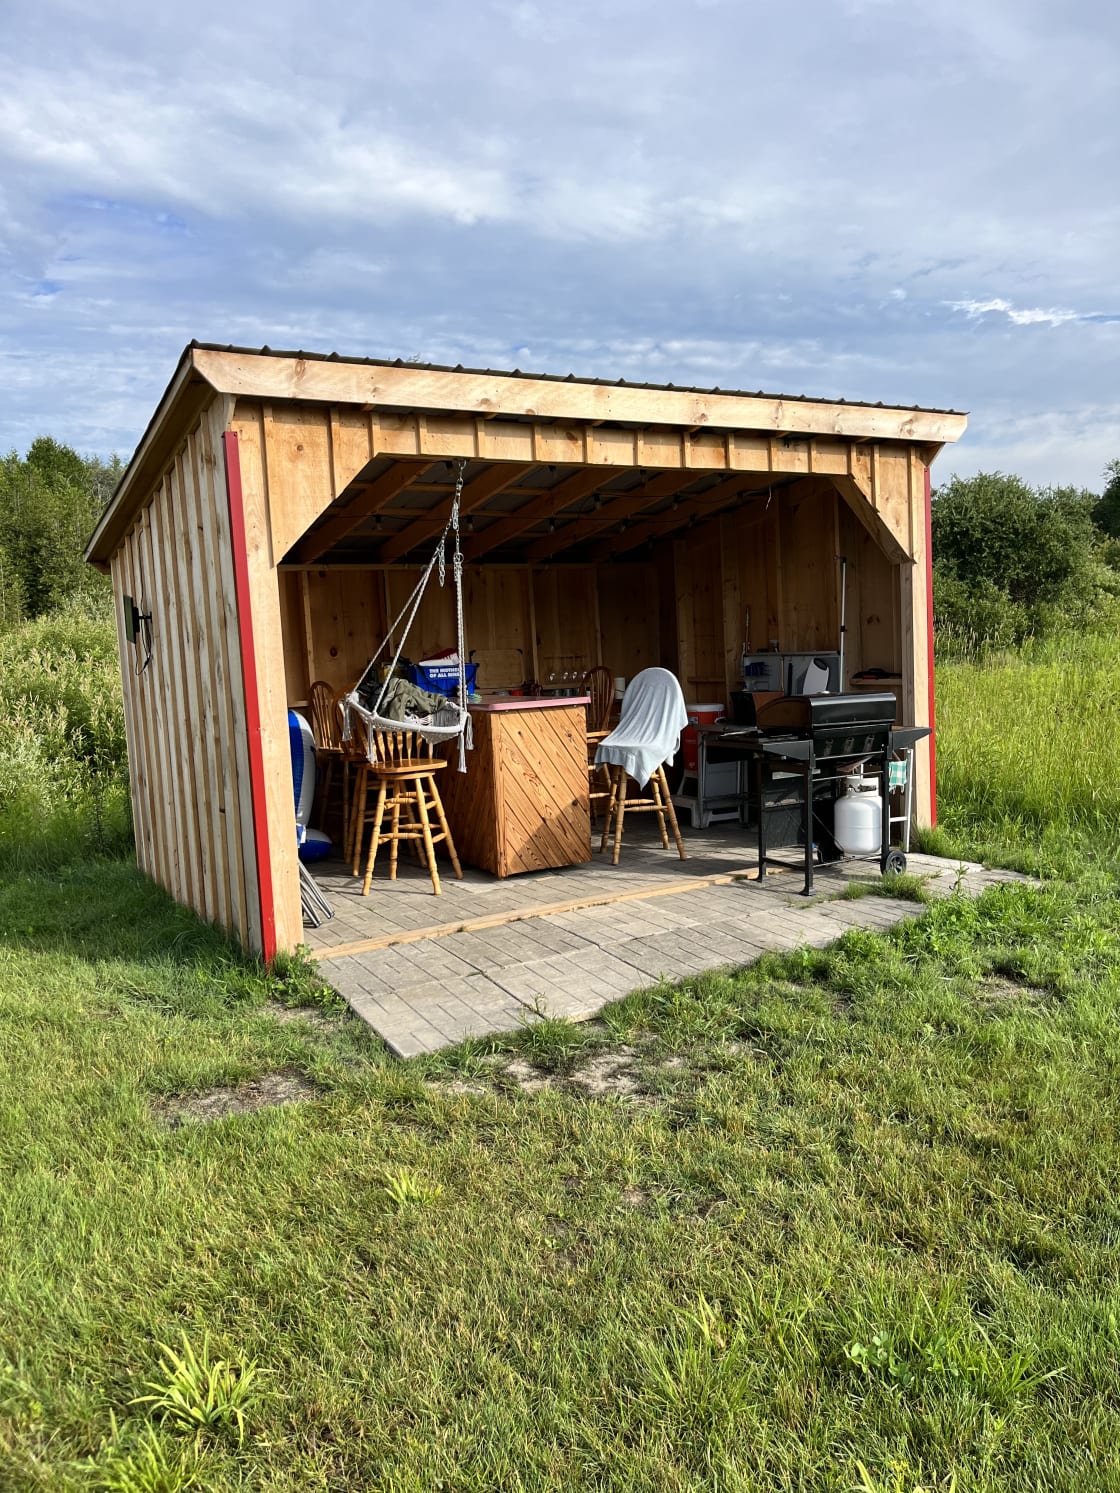 Outdoor kitchen hut. Private and right beside bunkie. 